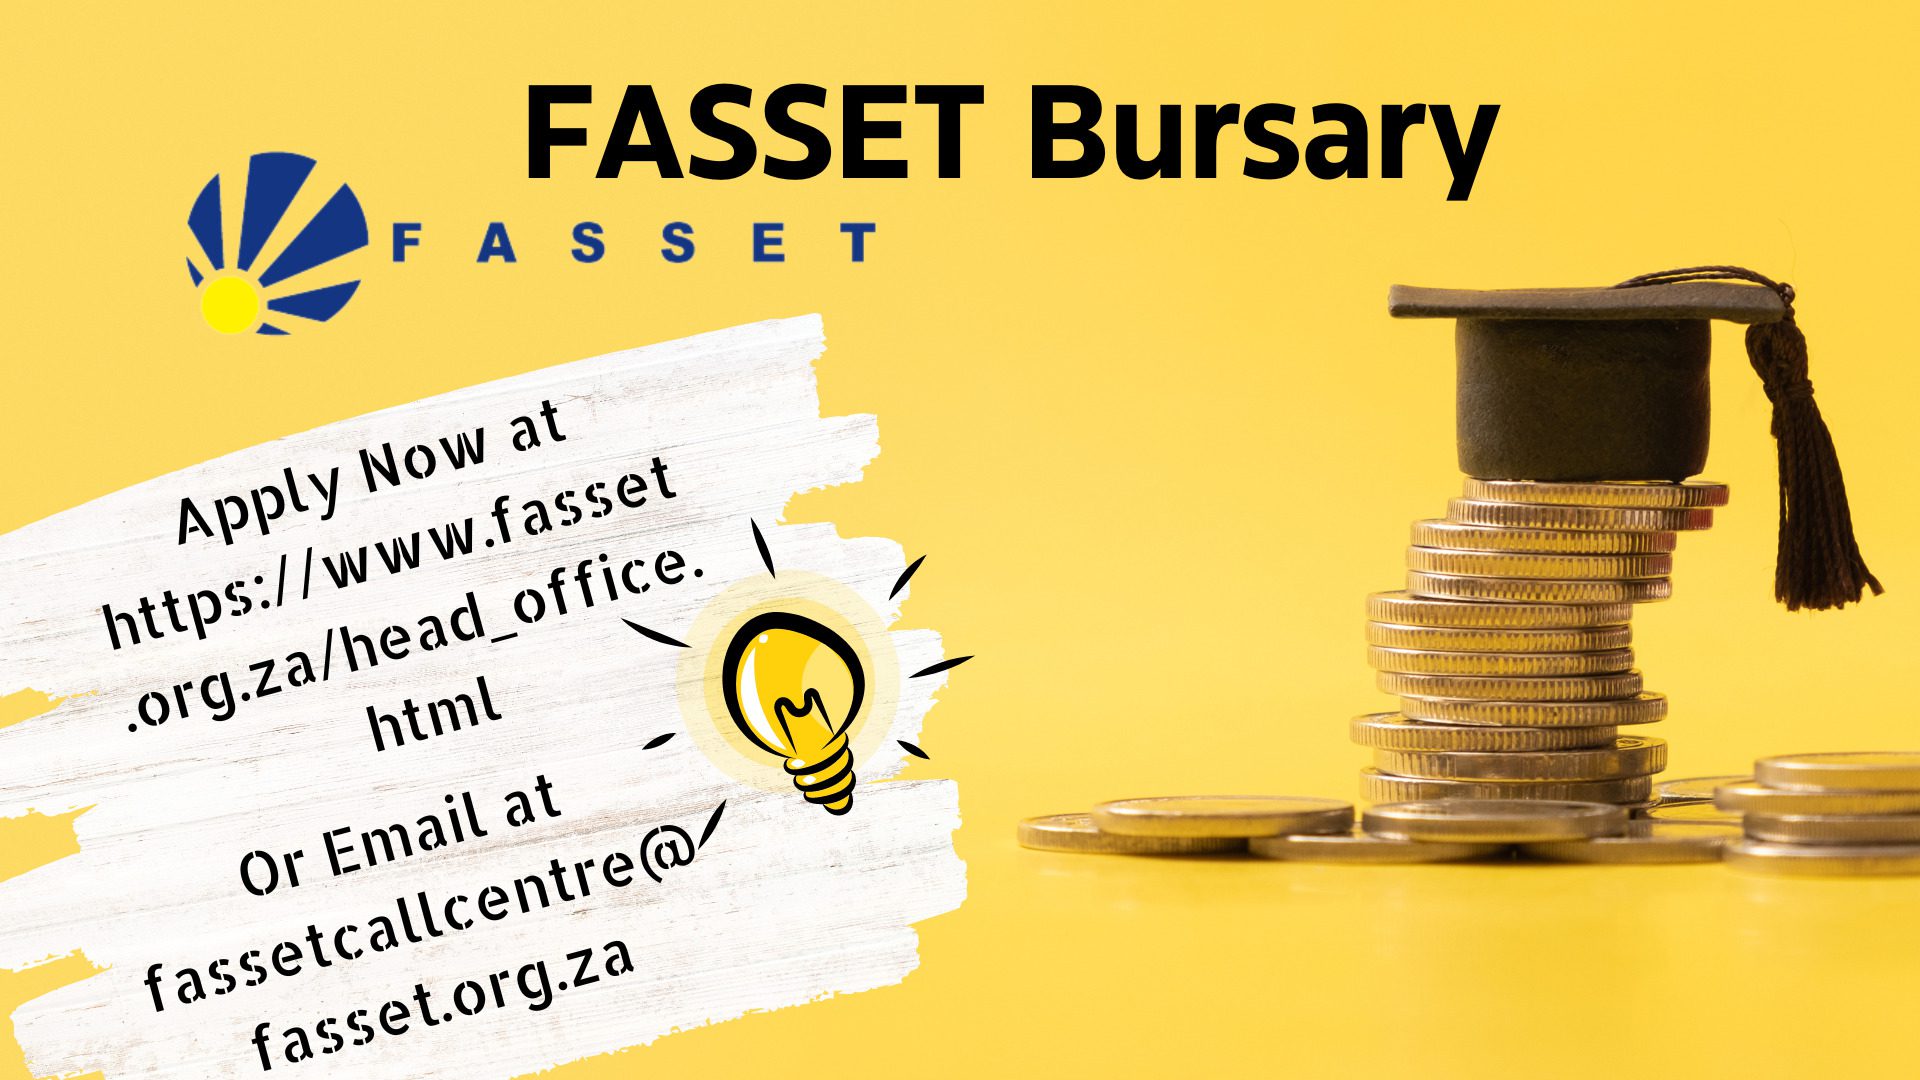 How to Check Your FASSET Bursary Application Status